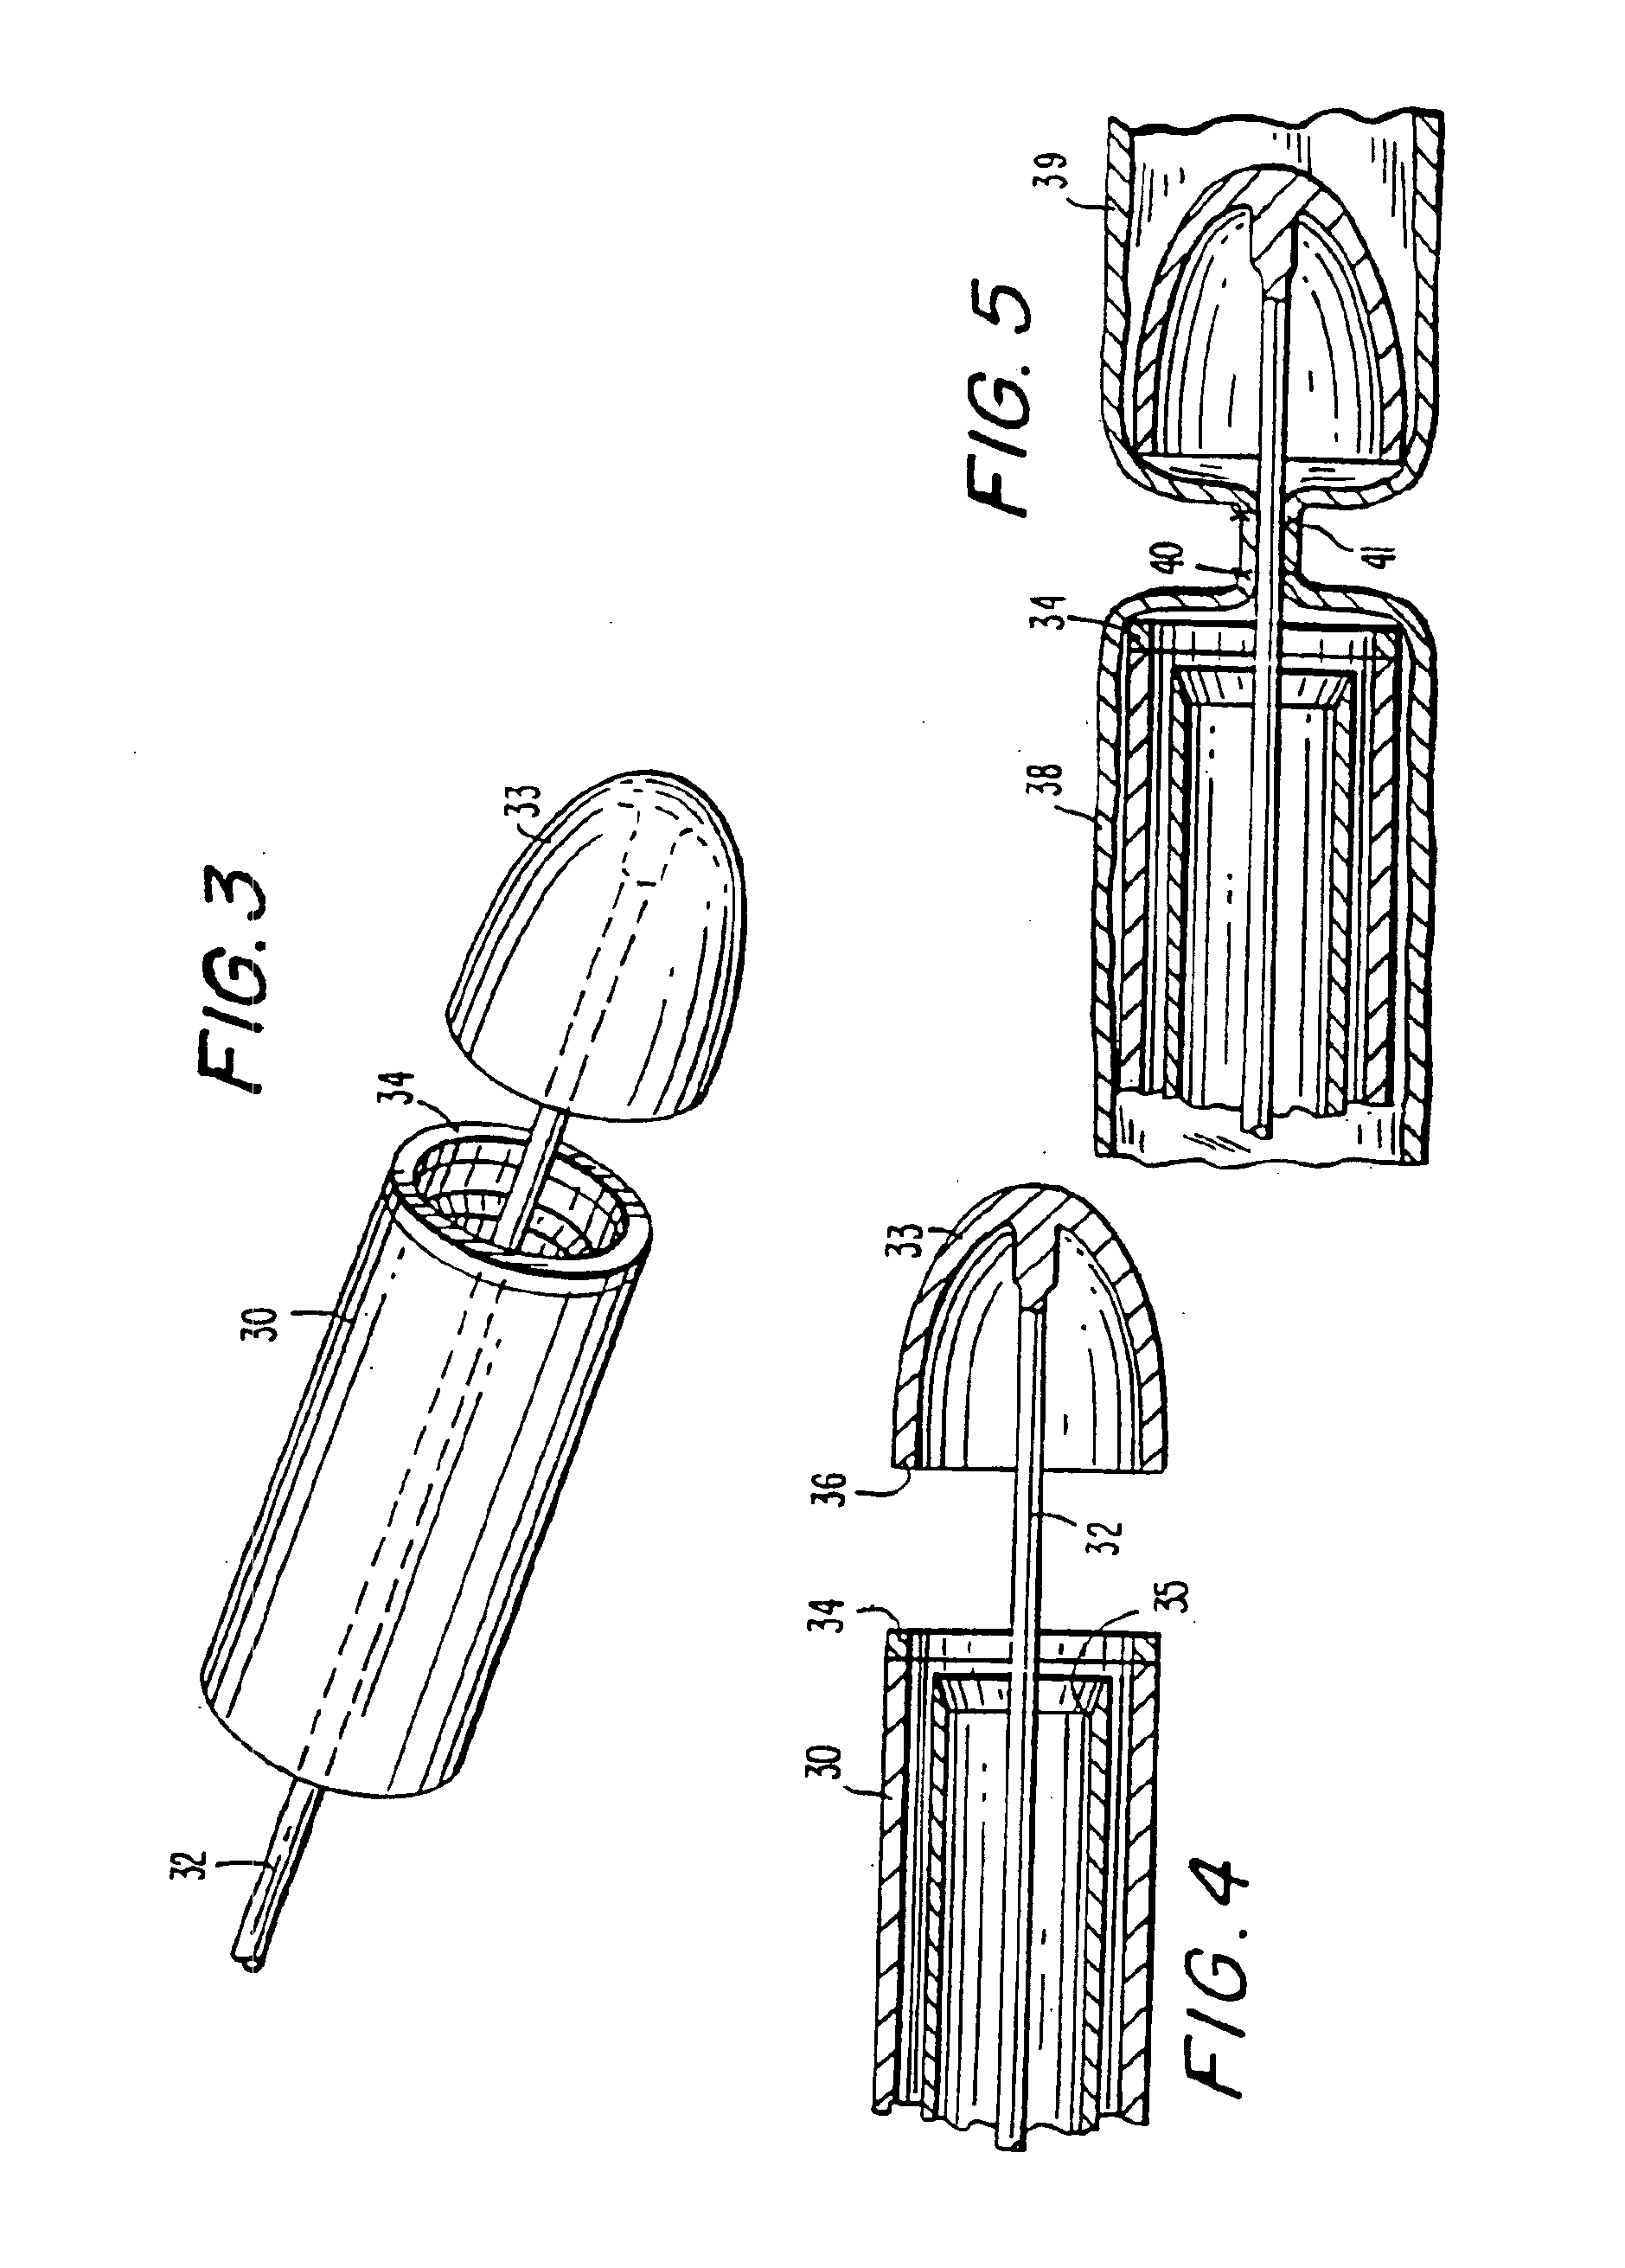 Electrothermal instrument for sealing and joining or cutting tissue